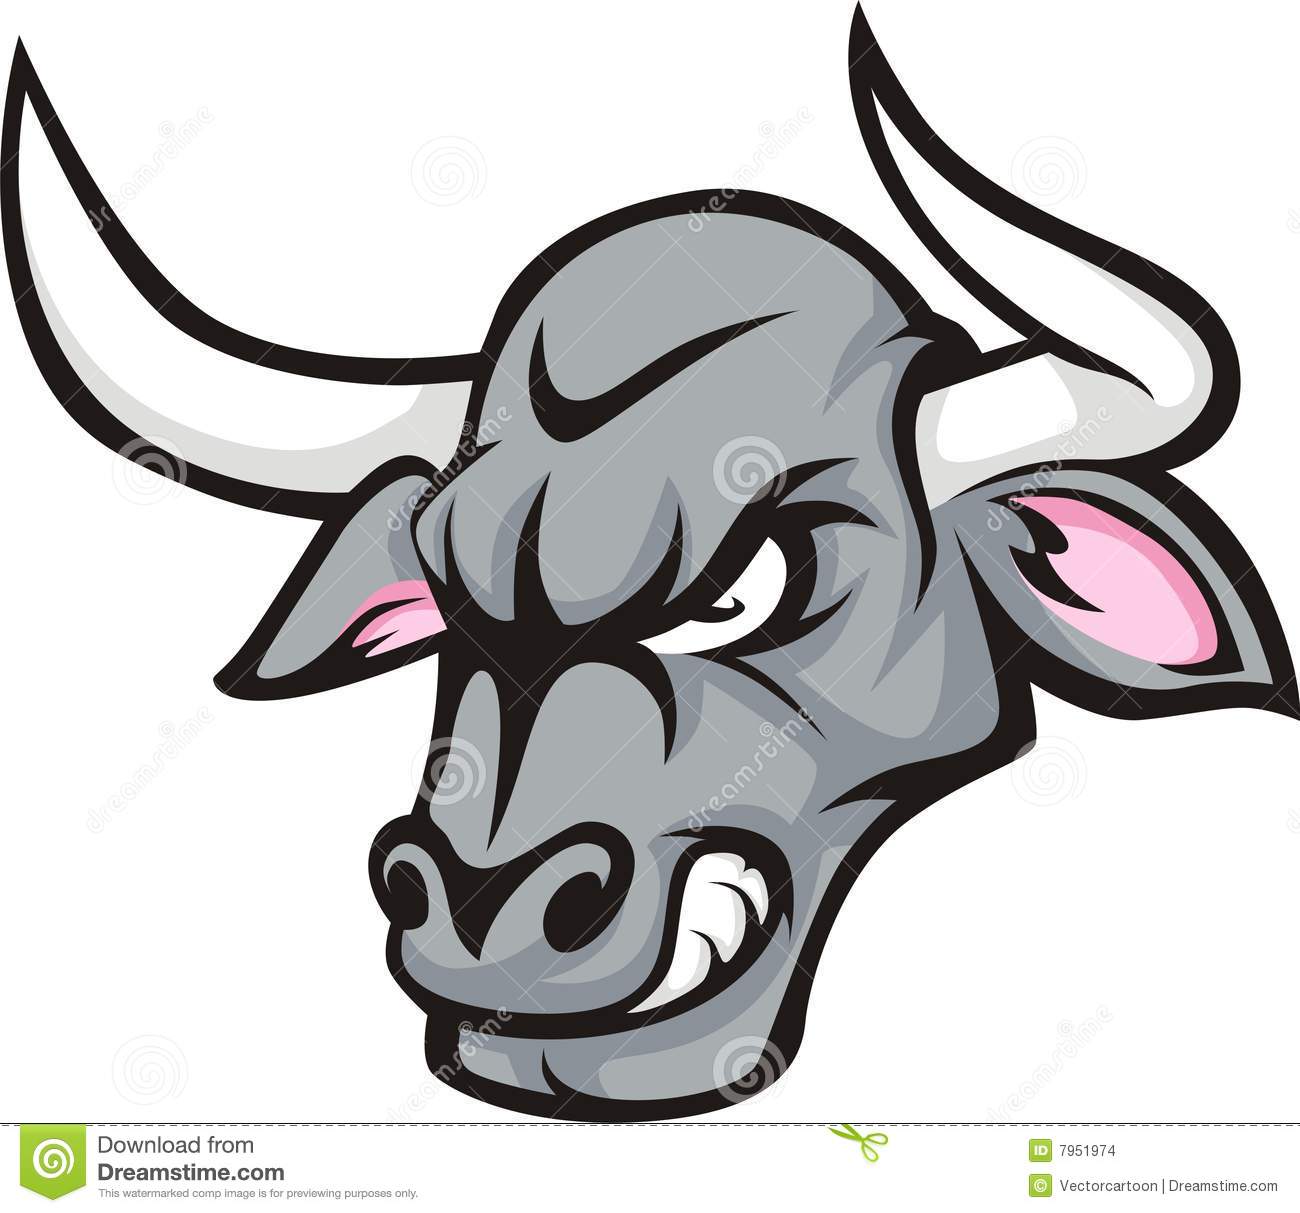 Illustration Of The Head Of A Raging Bull Ideal For Sports Mascot